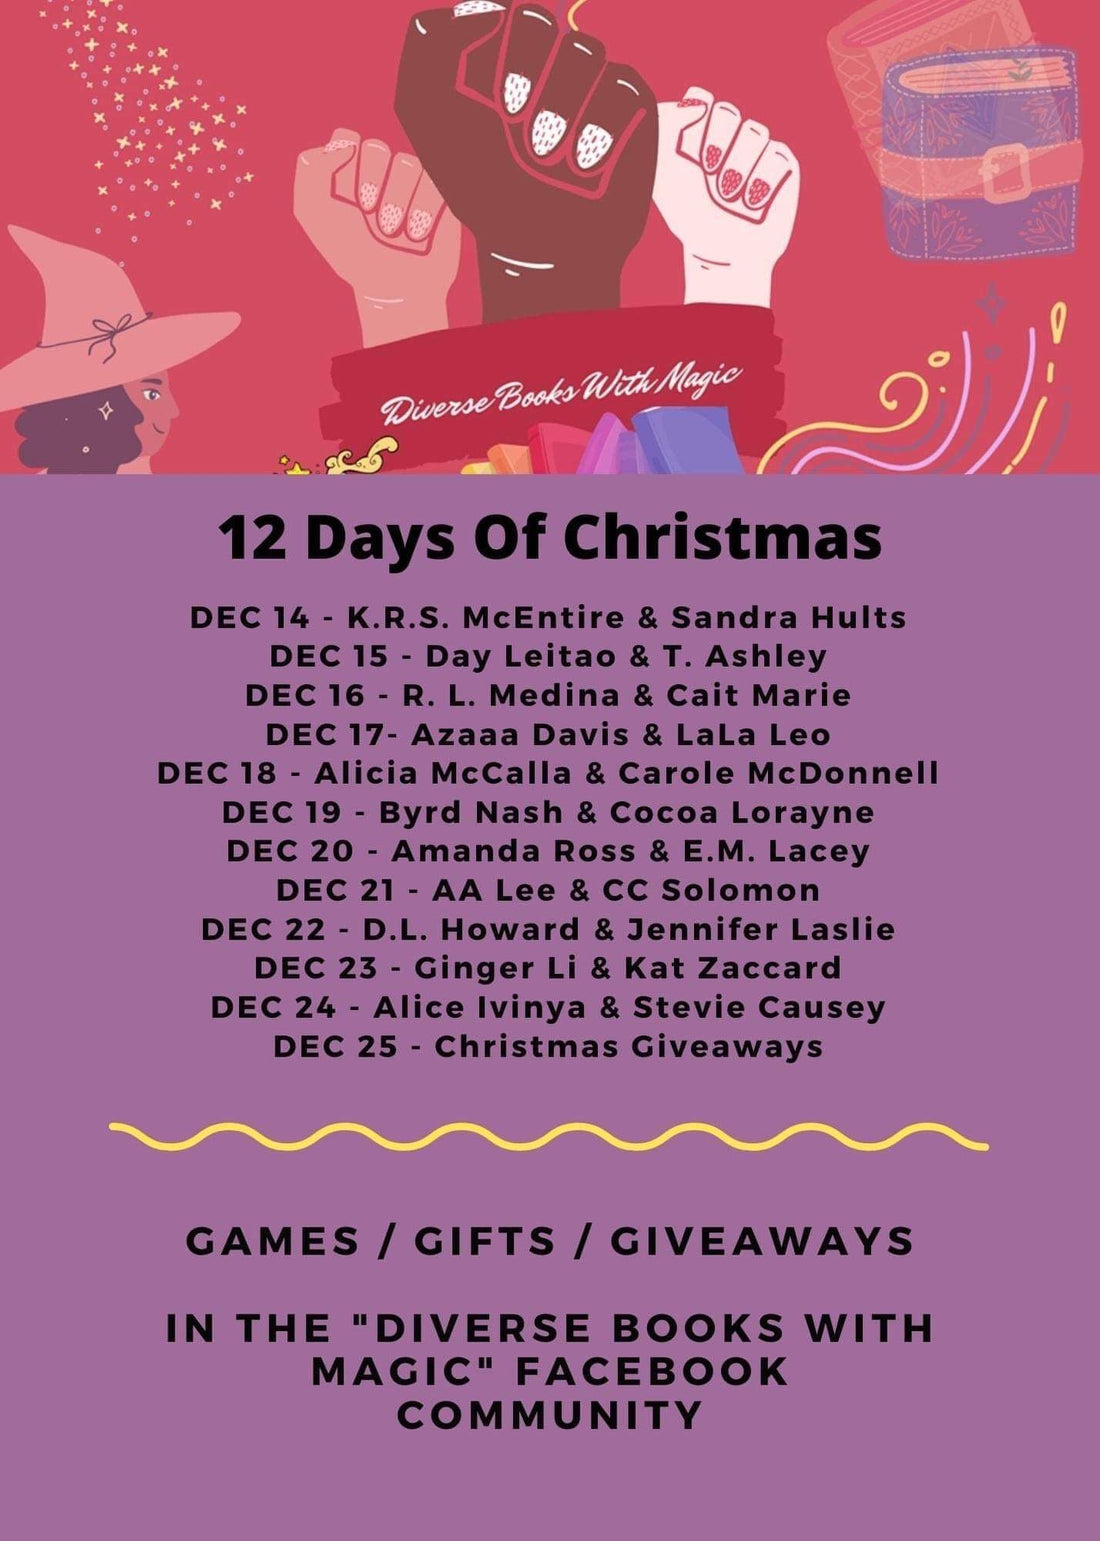 12 Days of Christmas Author Take Over Event in the Diverse Books with Magic Facebook Community